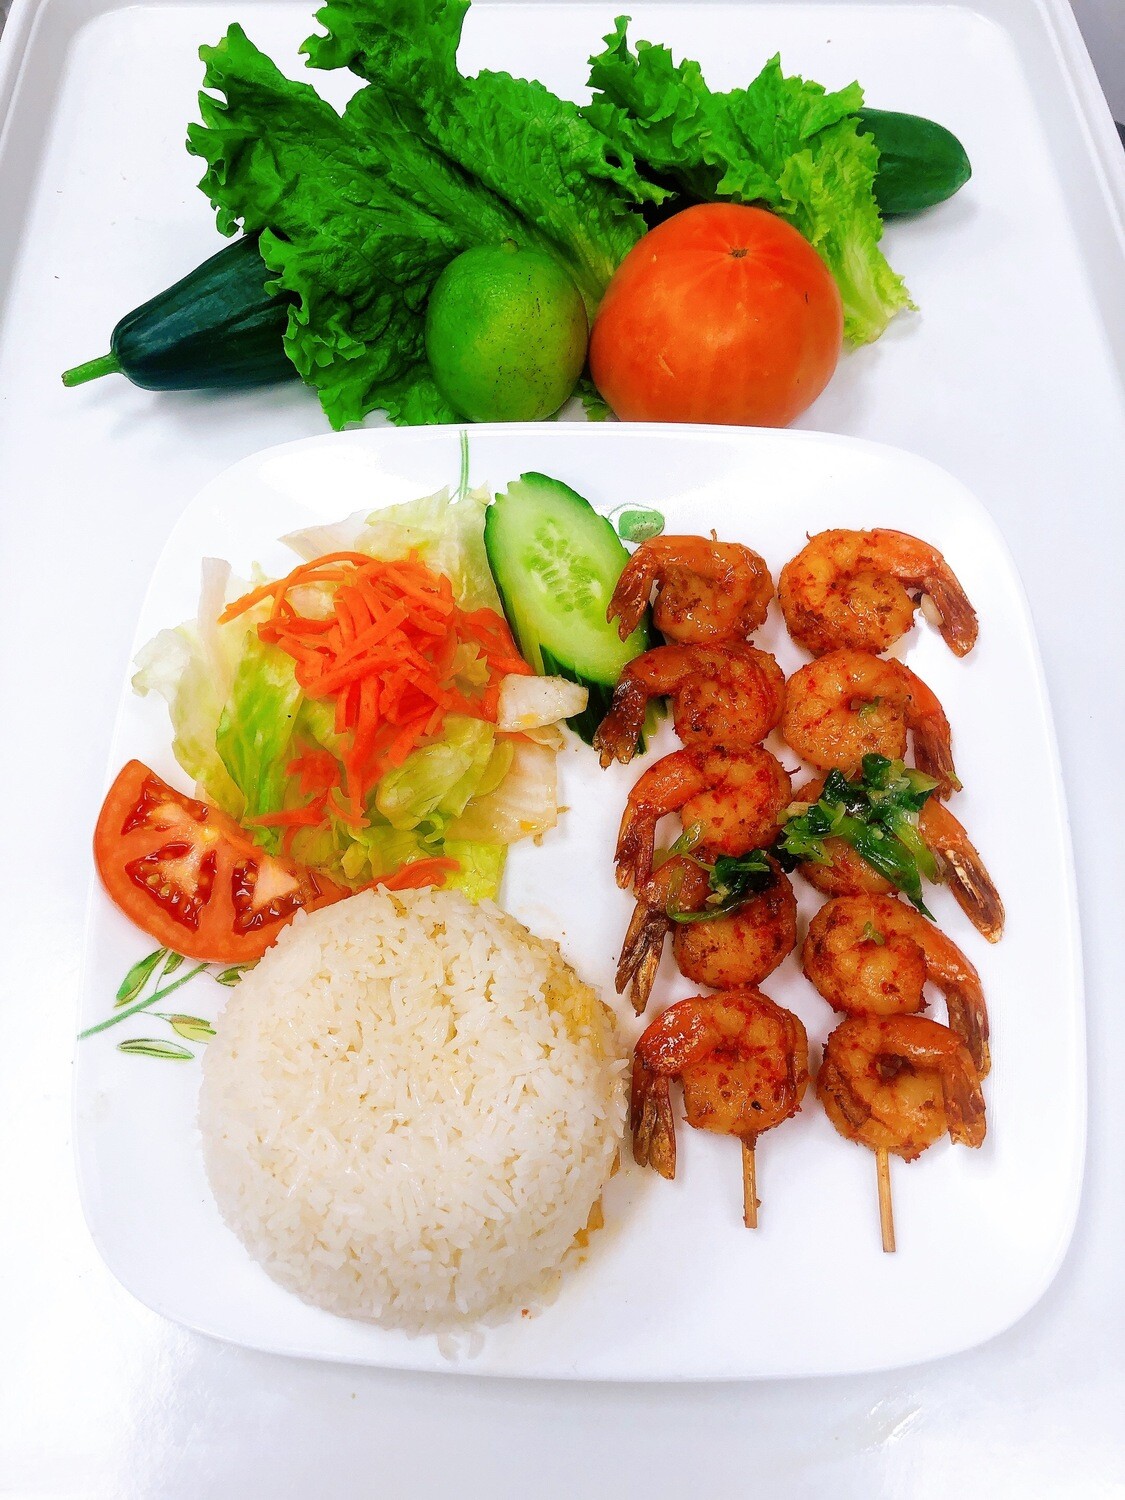 510- Grilled Tiger Shrimp (10 pcs) with Satay Sauce on Steamed Rice